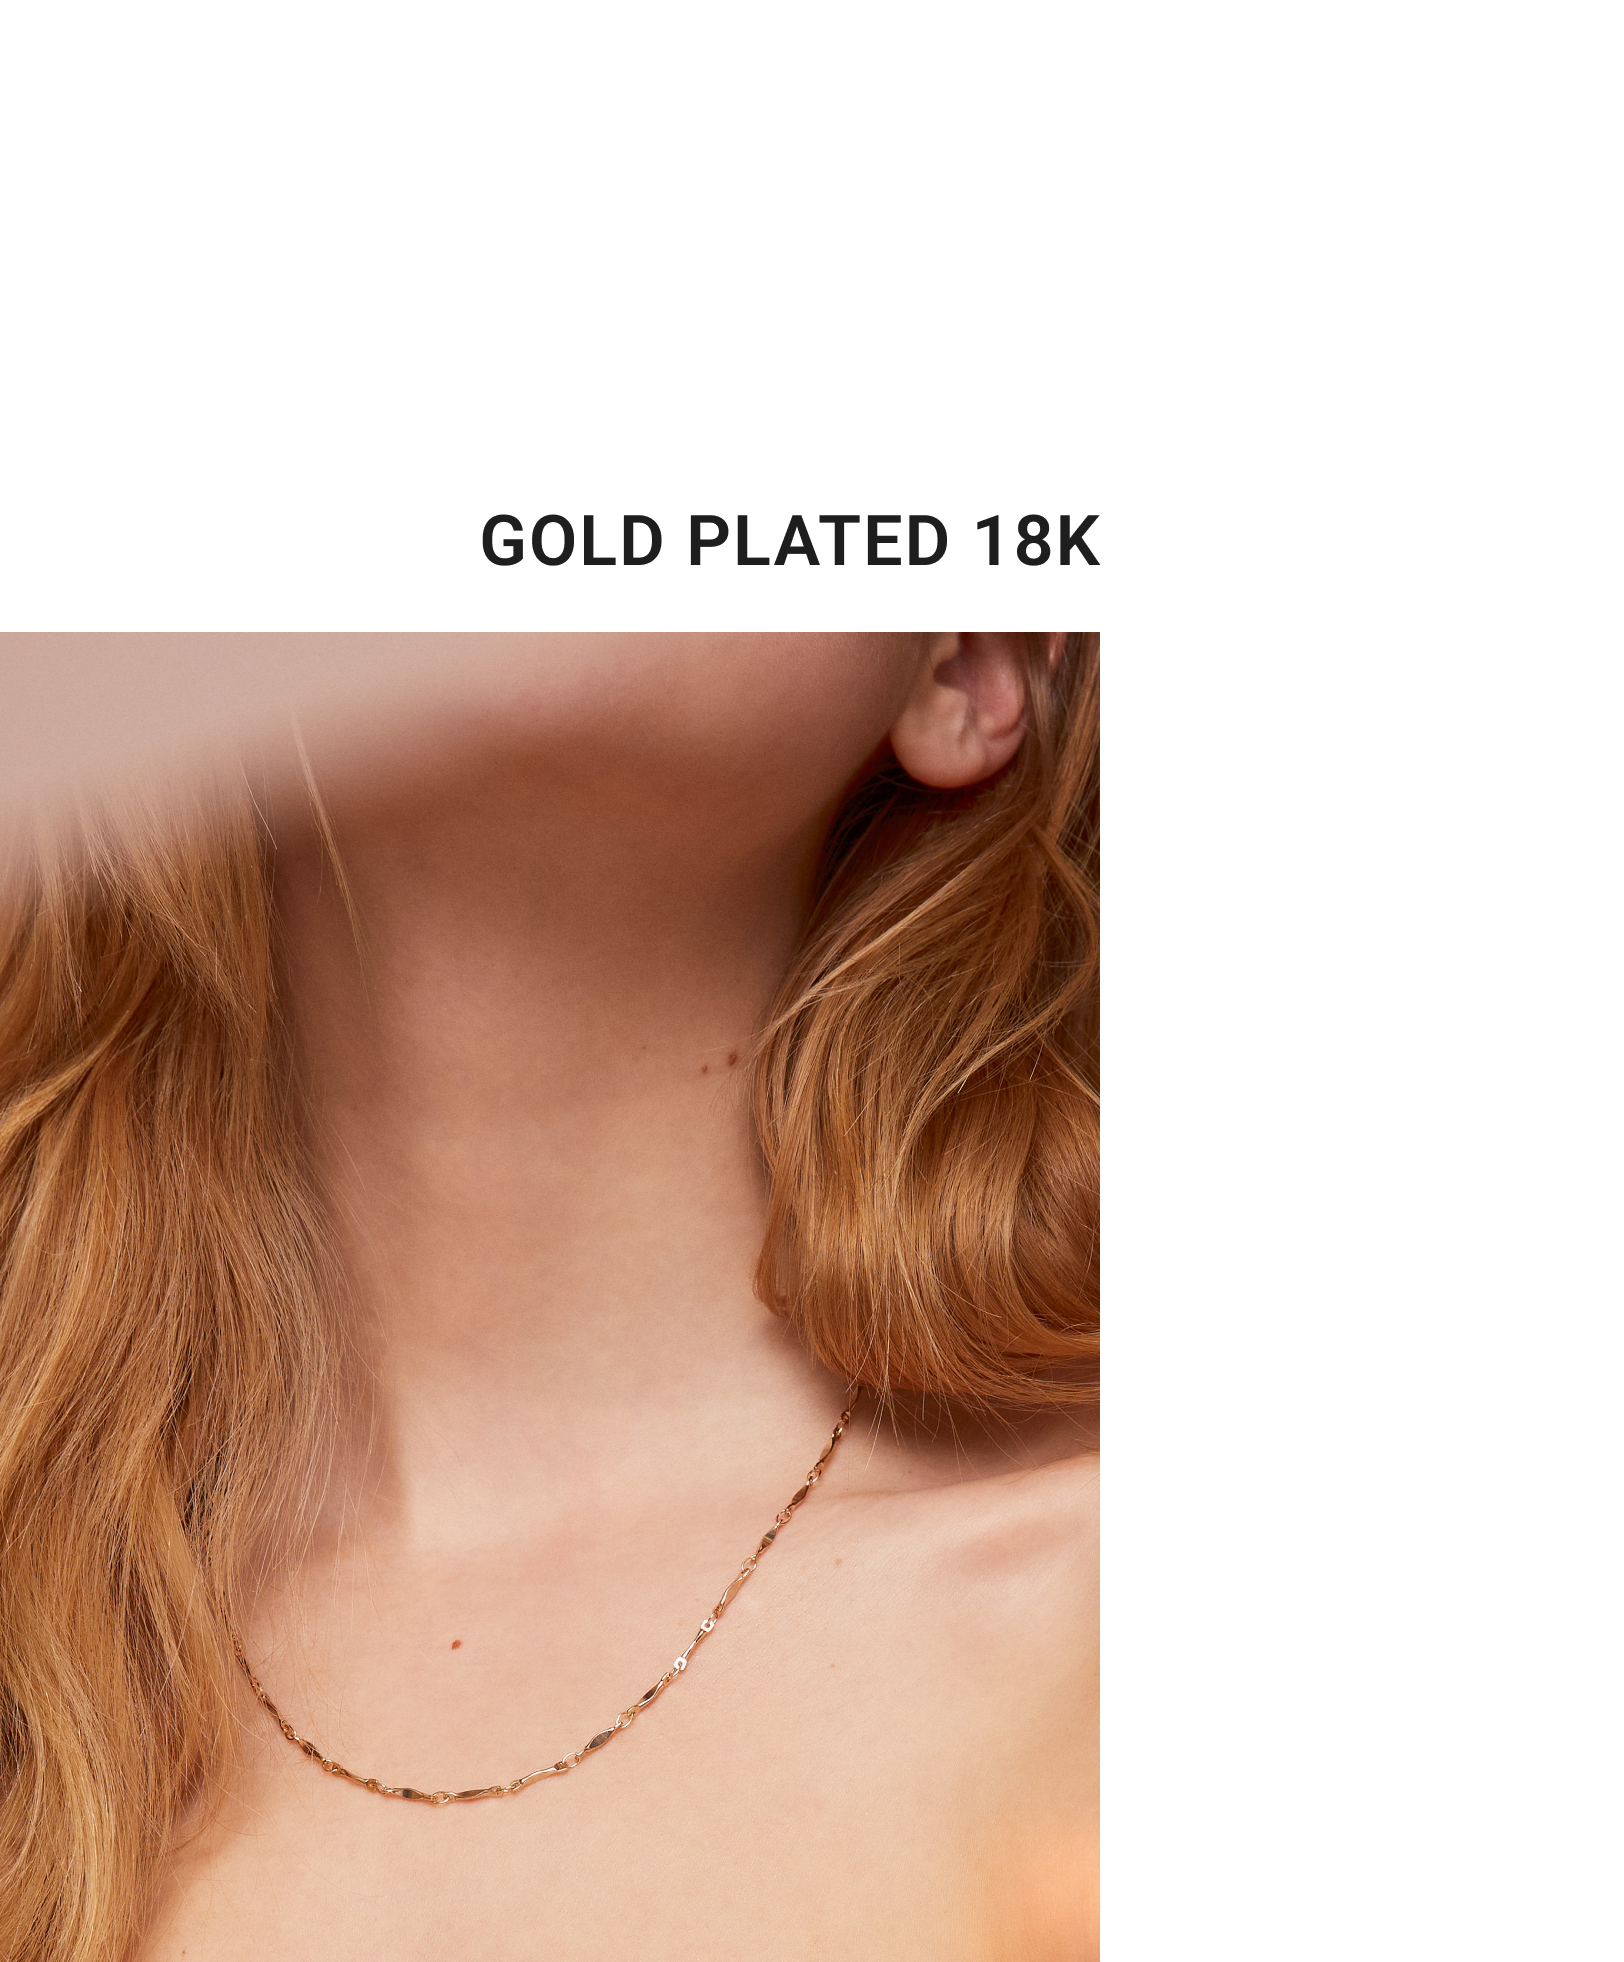 18k gold-plated link necklace